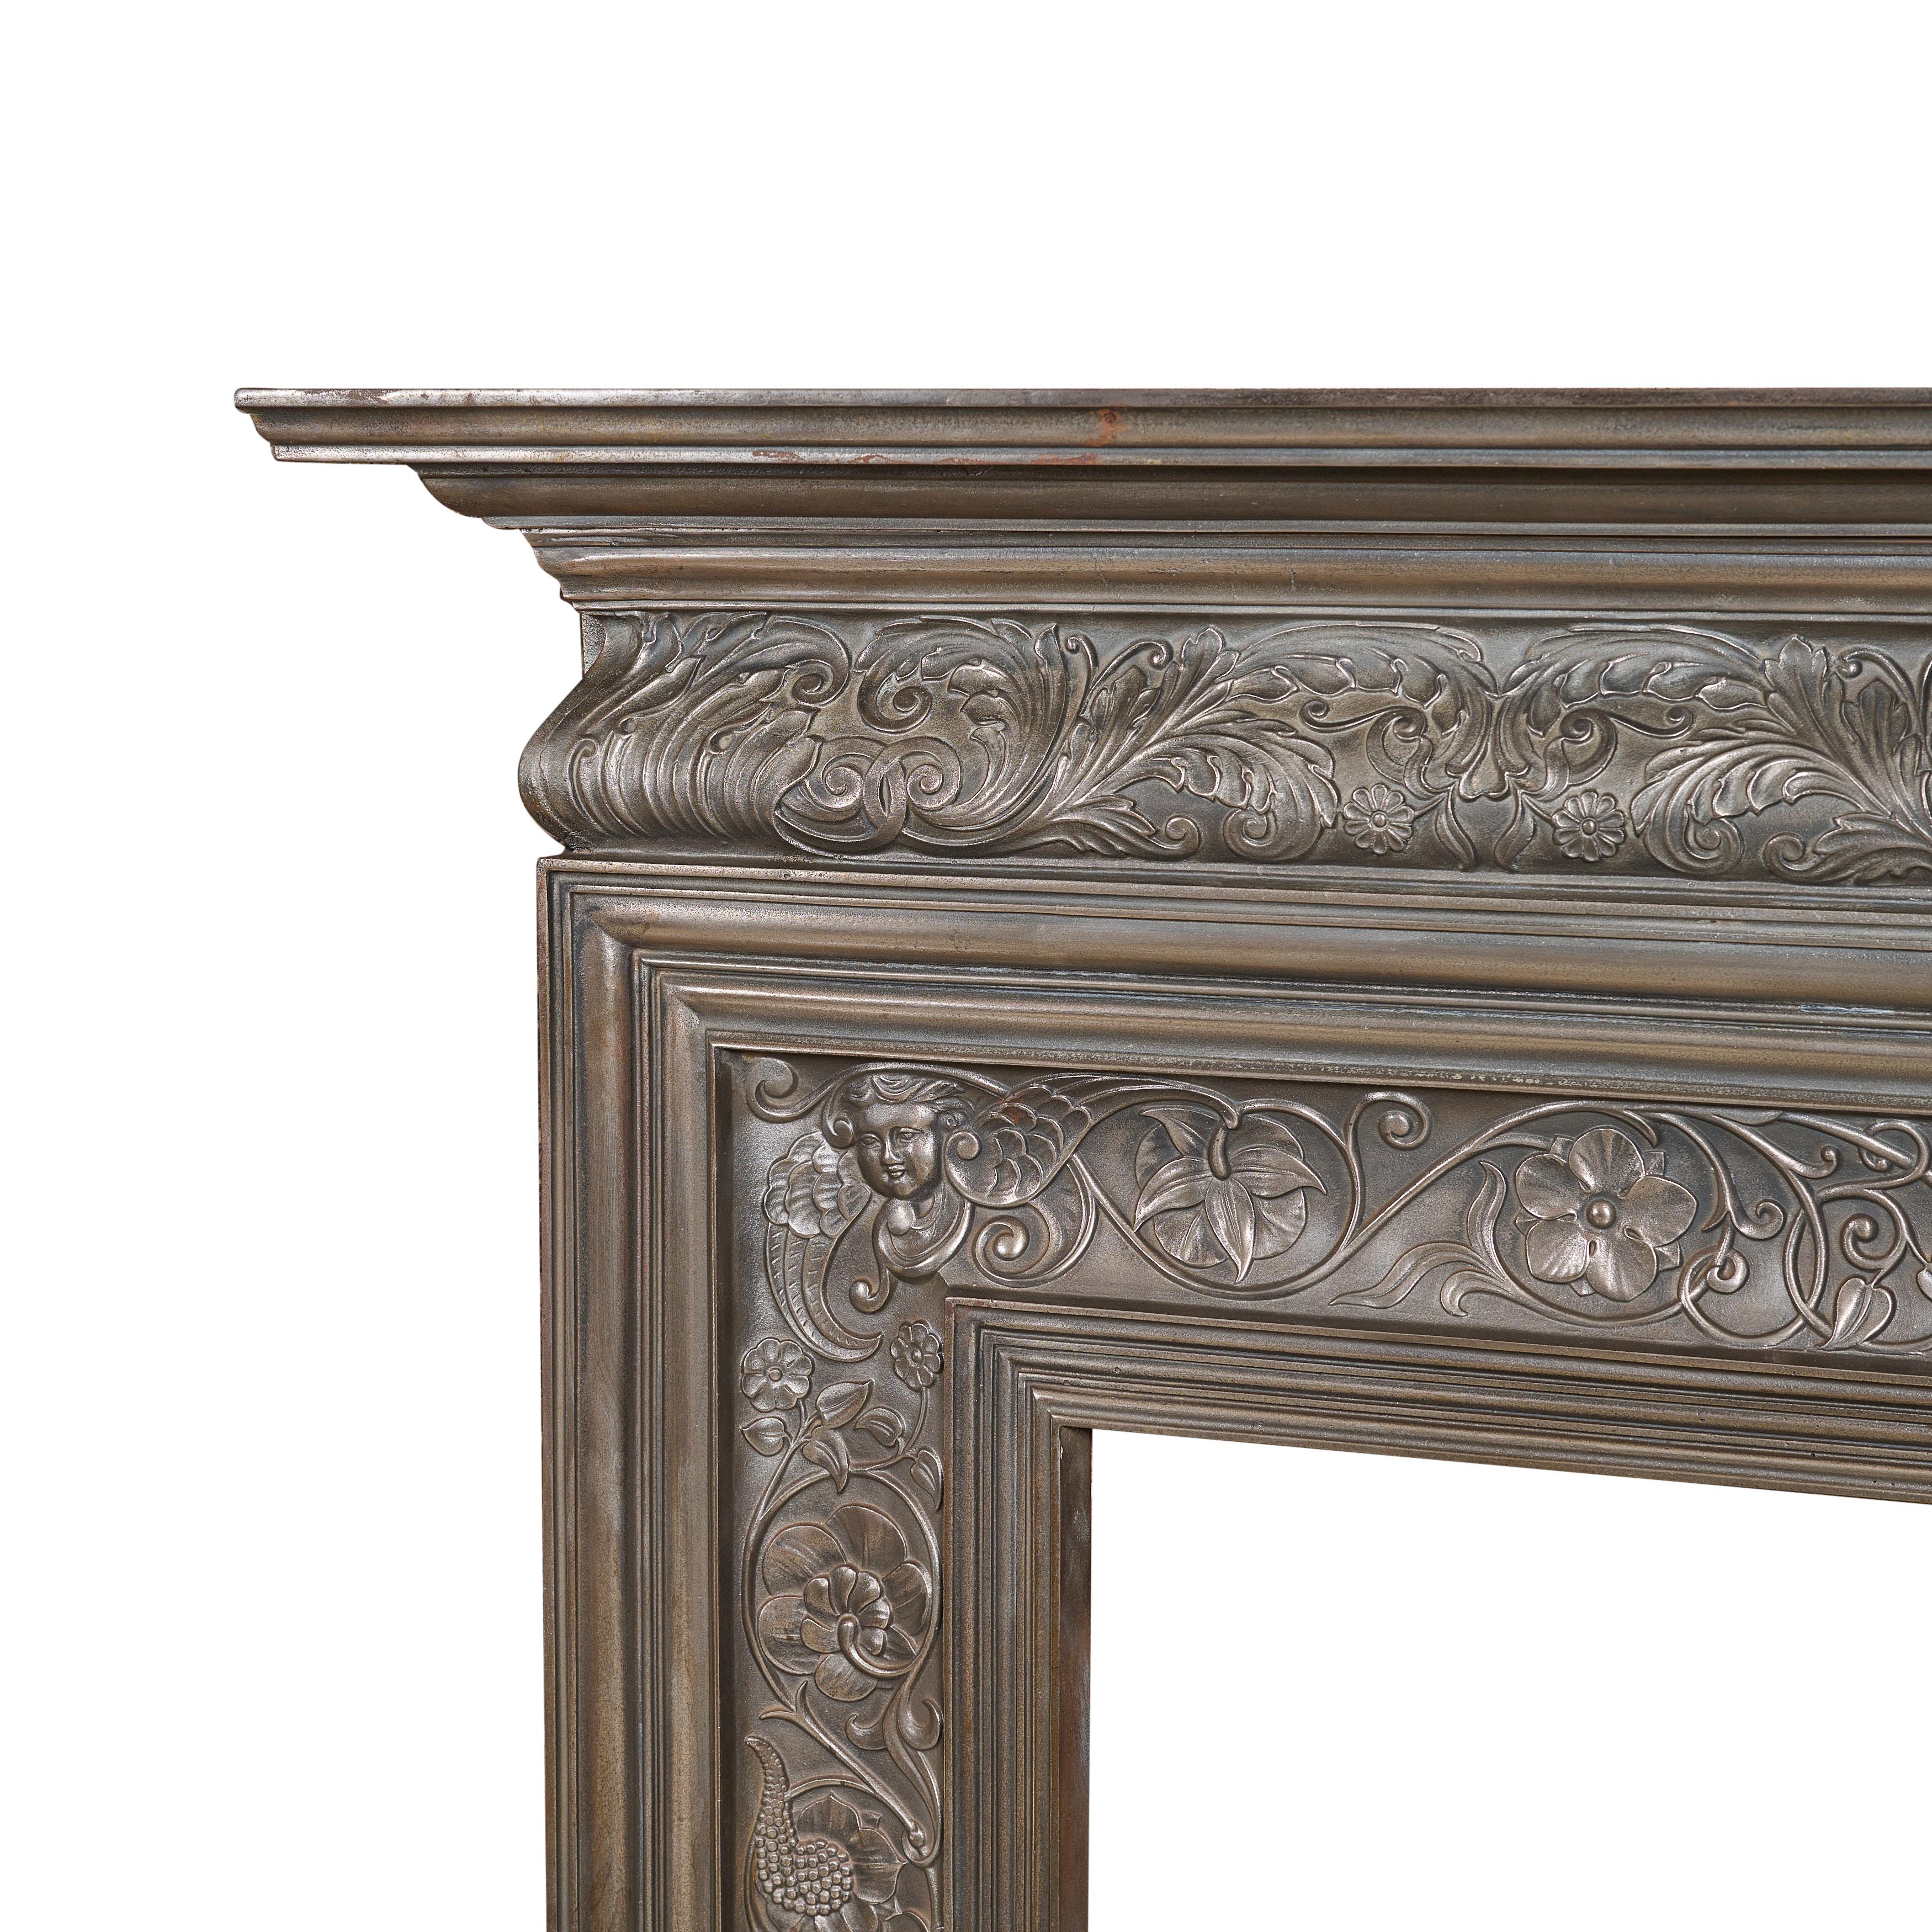 Polished cast iron fireplace surround. Great design by Coalbrookdale with cherub heads and earns. Amazing casting.